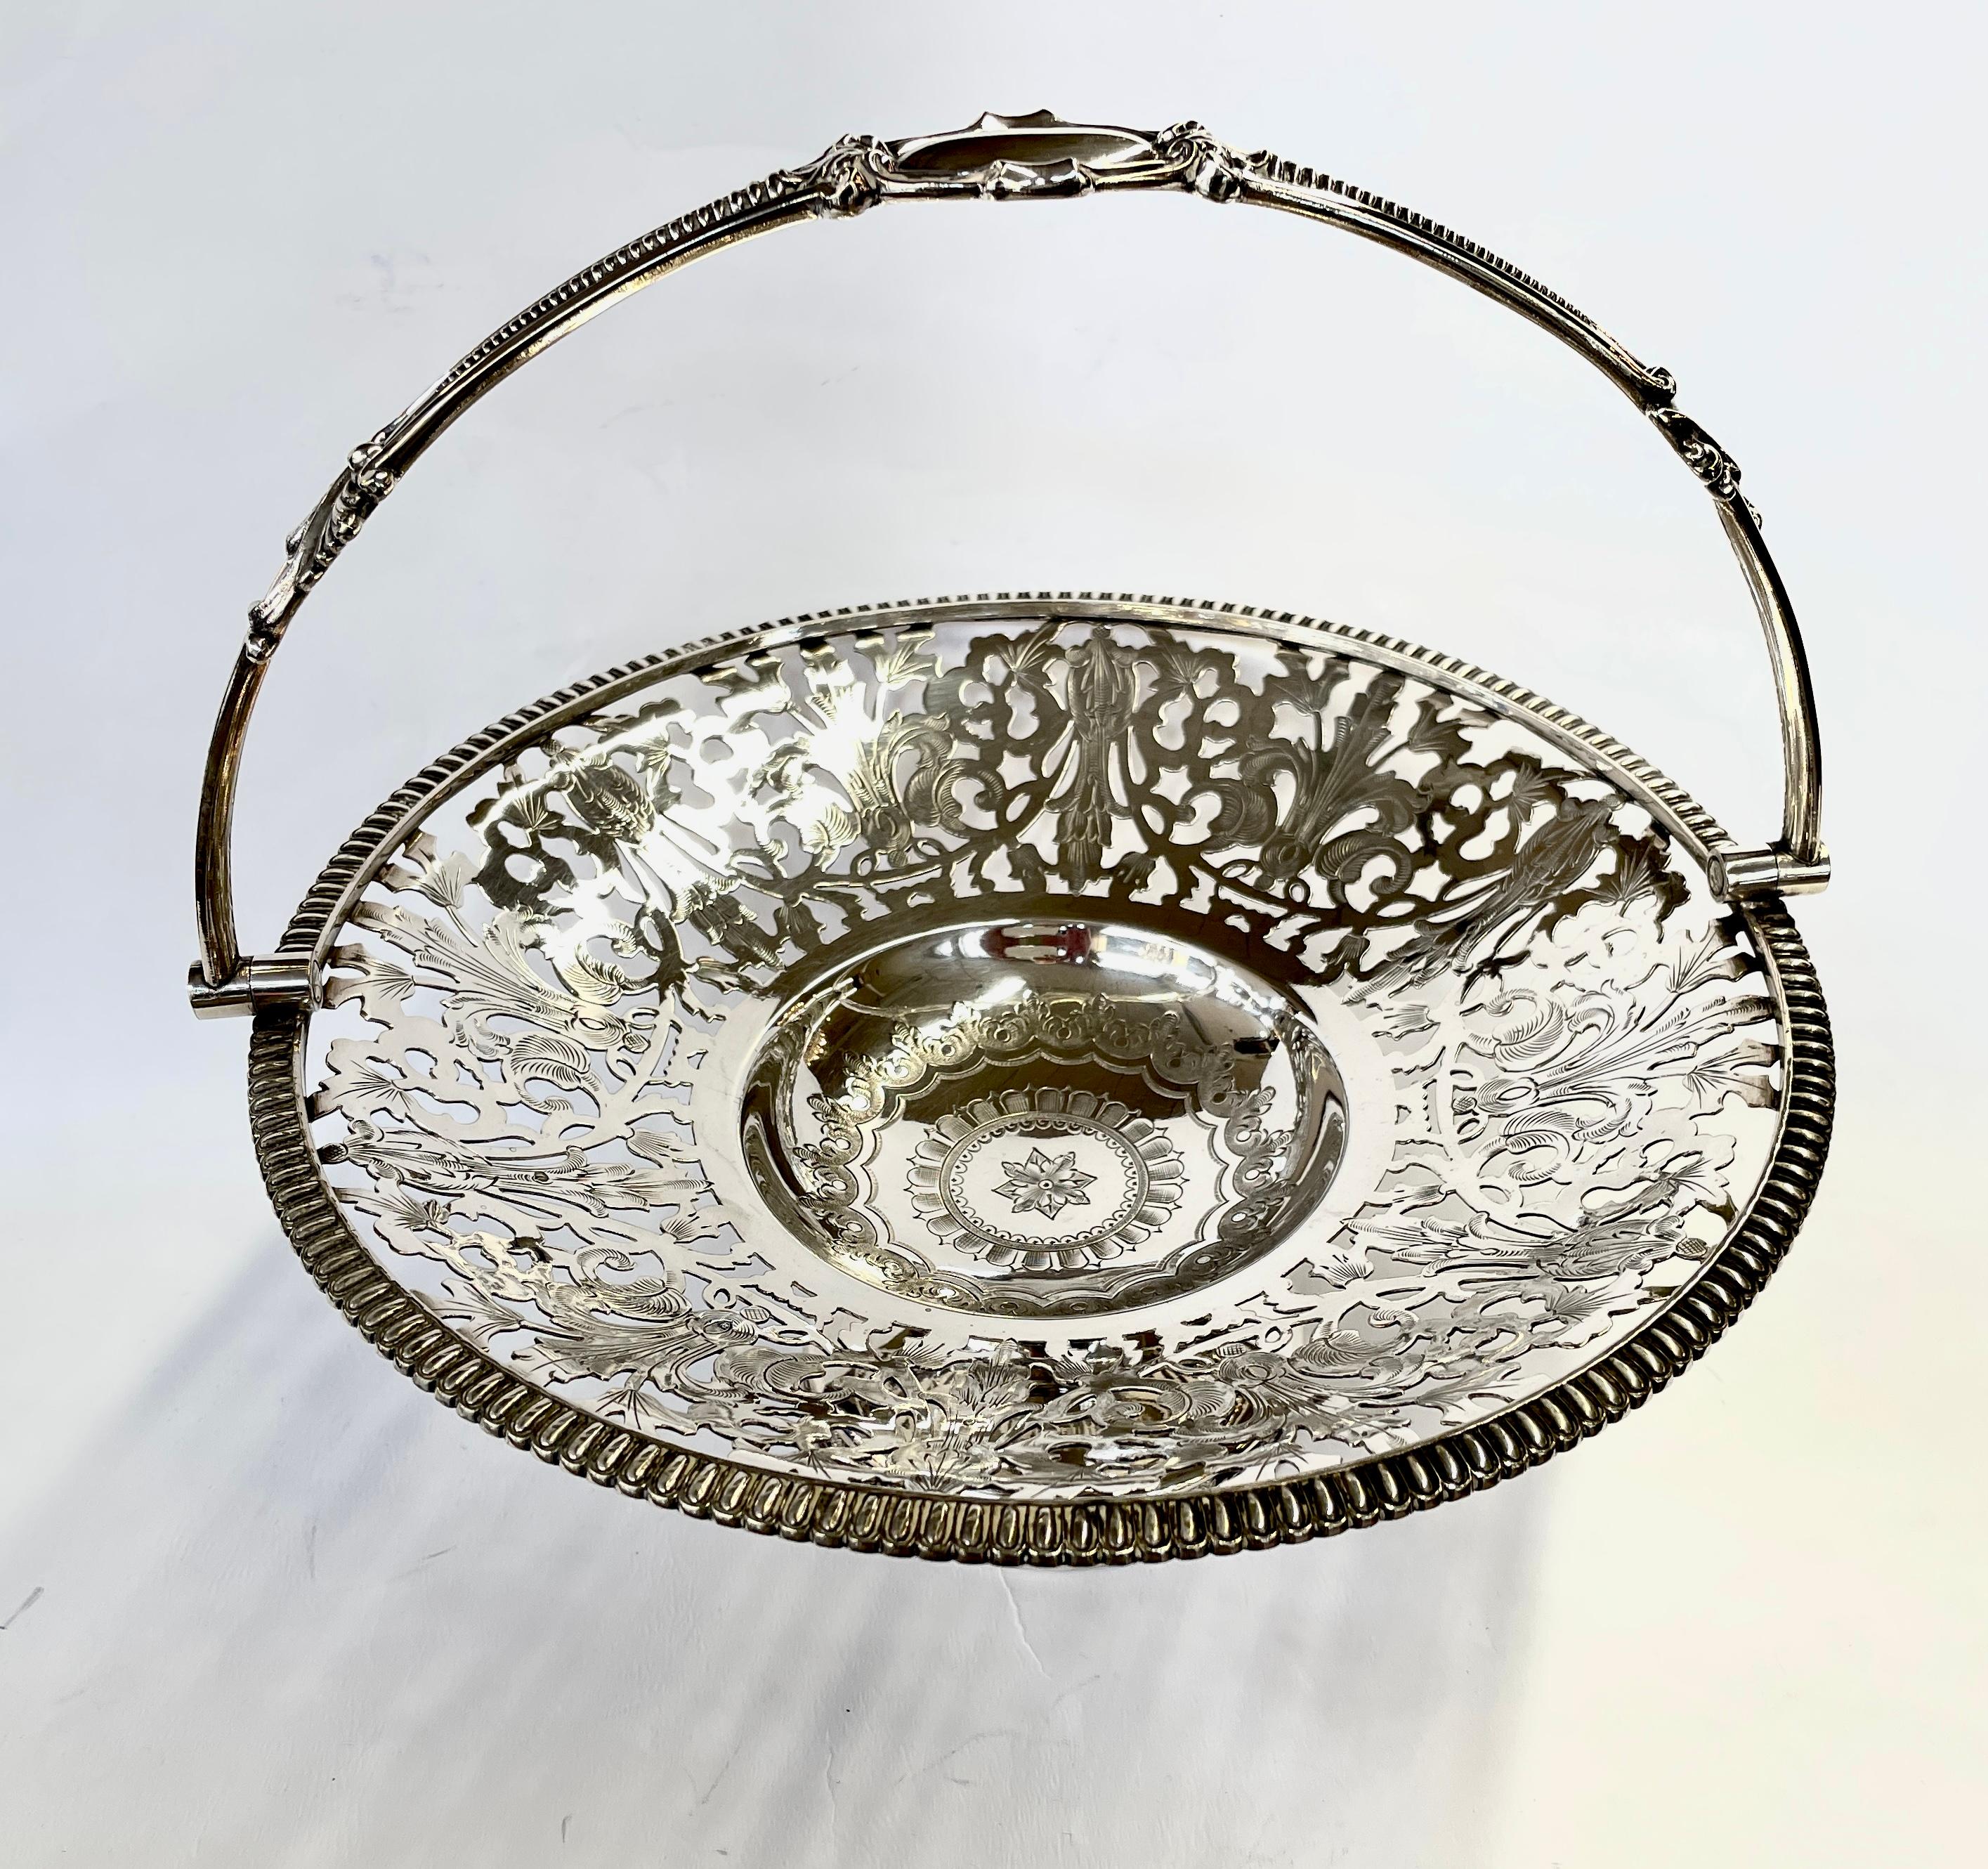 Fabulous quality extraordinary hand engraved and pierced round cake, bread or fruit basket. Also useful for flower arrangements (if a liner is used). Not only is the basket exceptionally hand-pierced, the pierced areas are bright-cut hand engraved